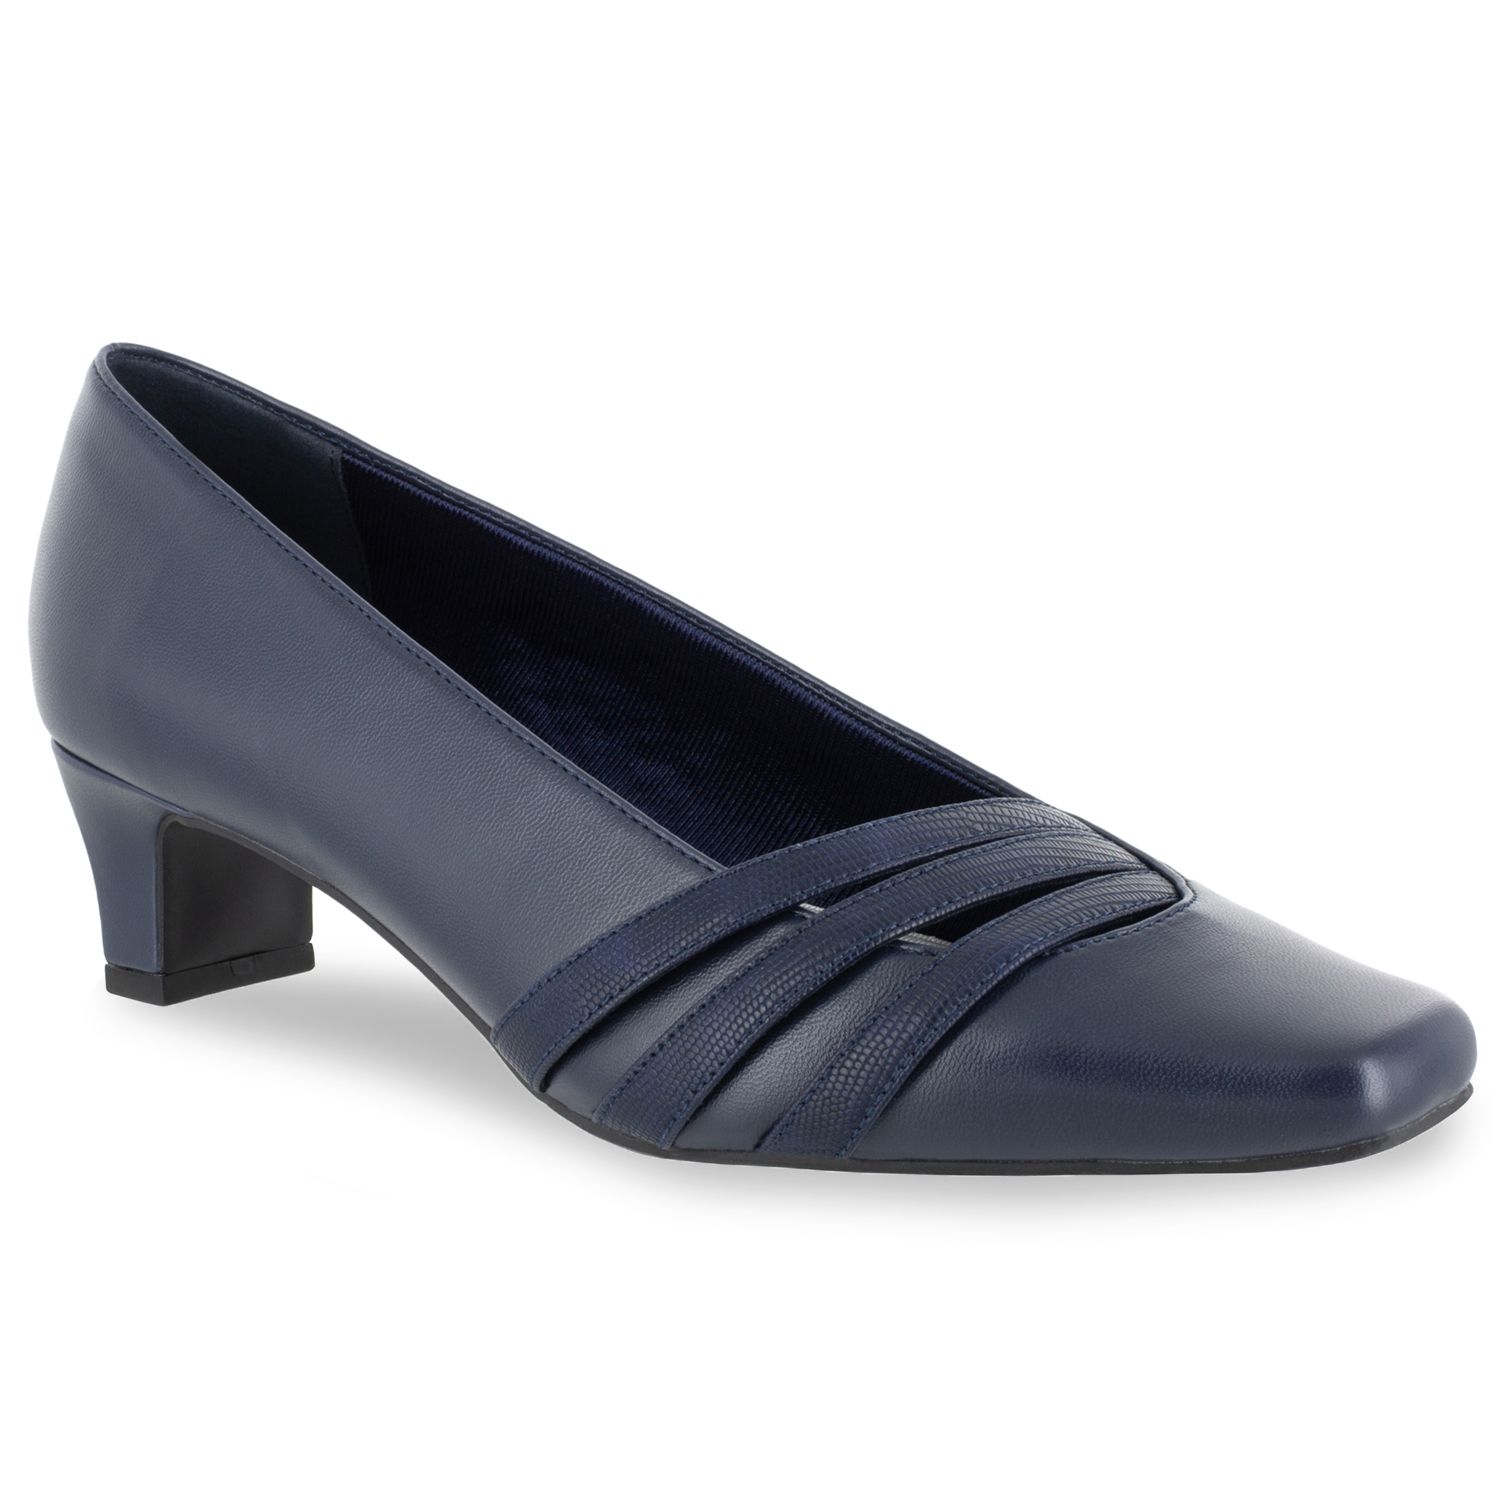 Image for Easy Street Entice Women's Square Toe Pumps at Kohl's.